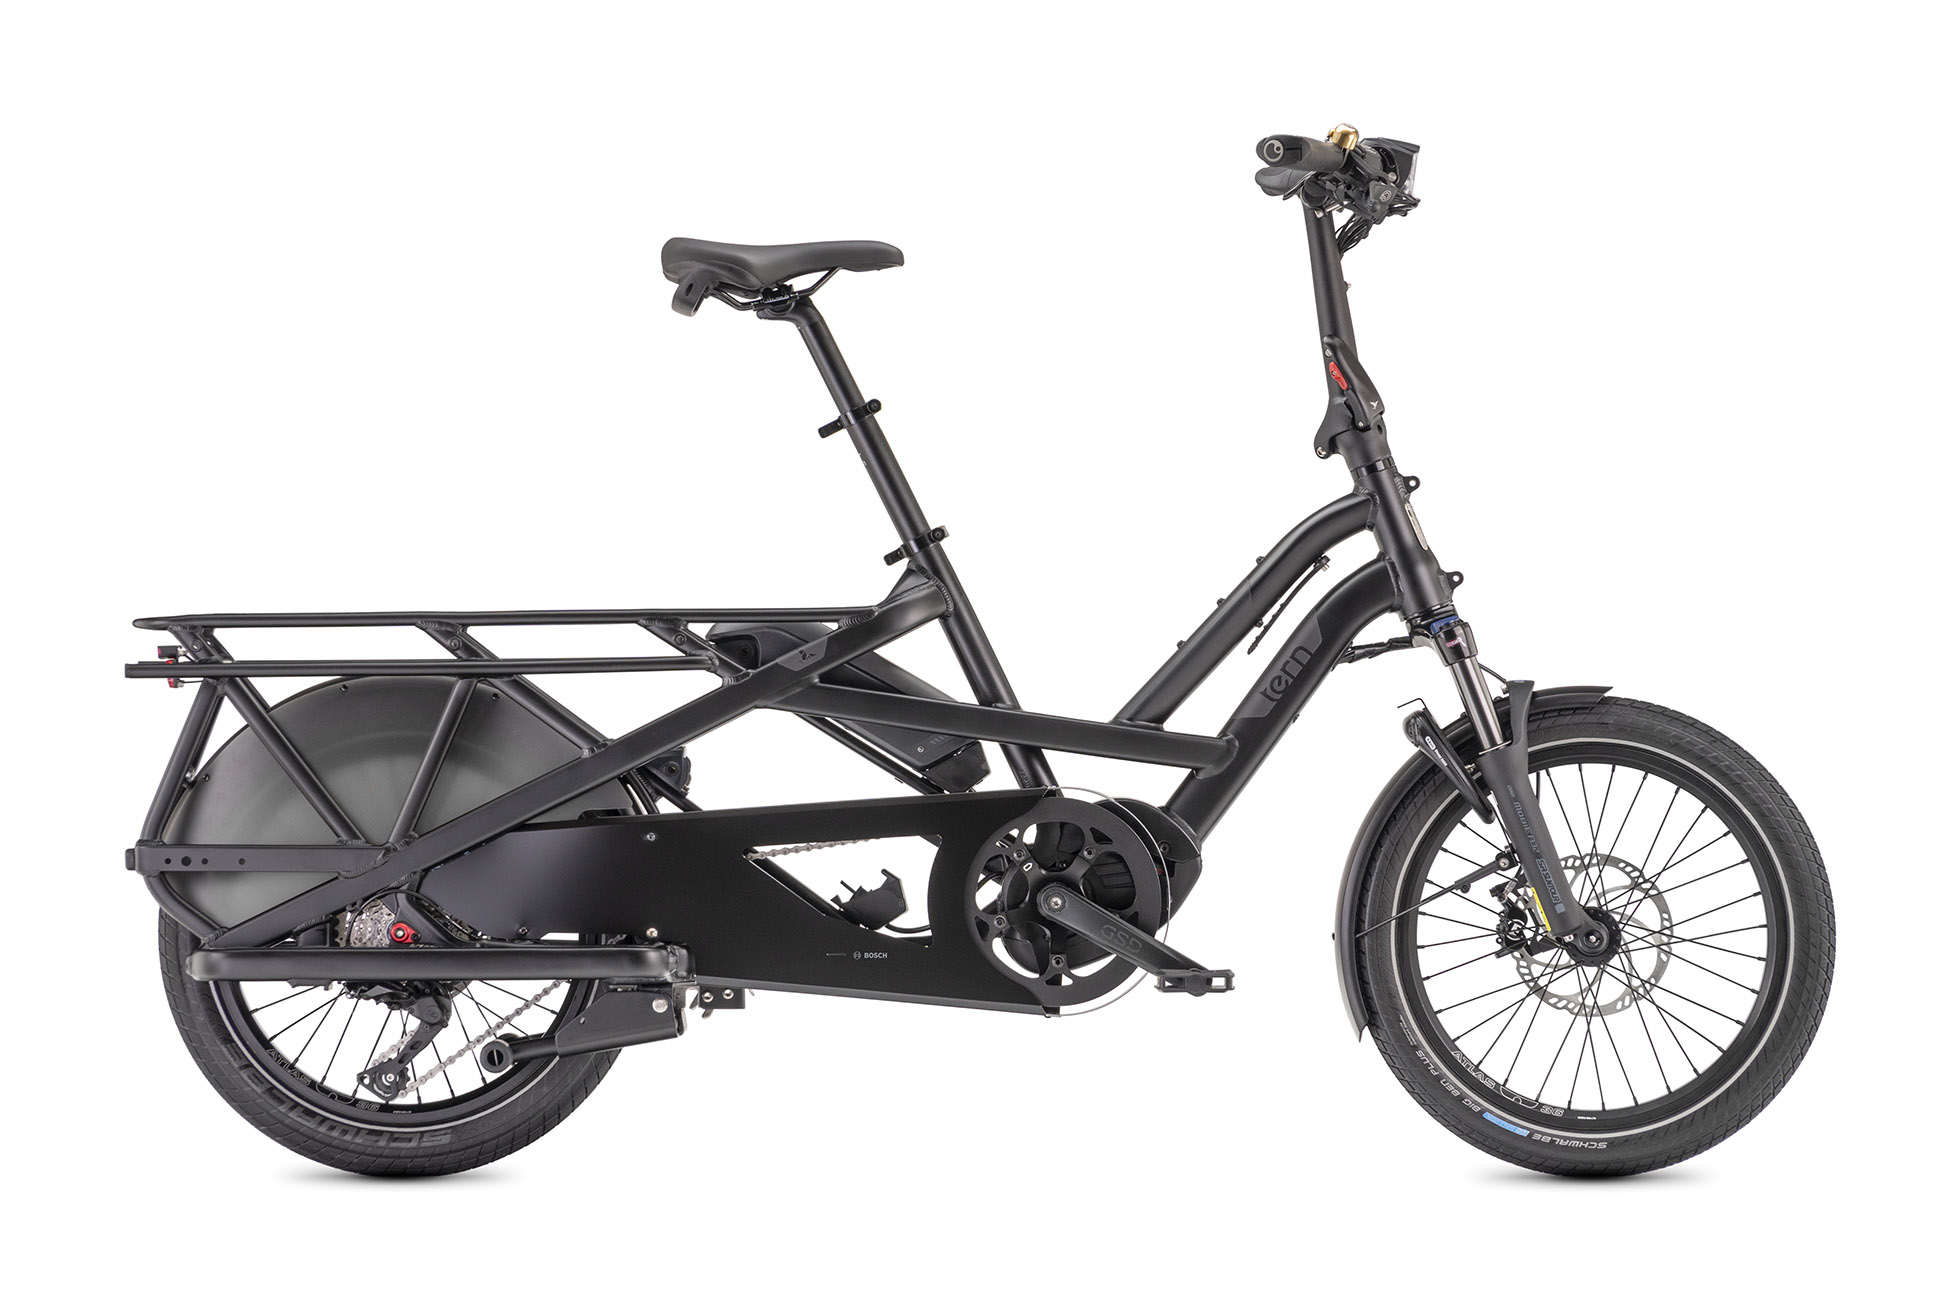 GSD S10: Our Most Popular Electric Cargo Bike